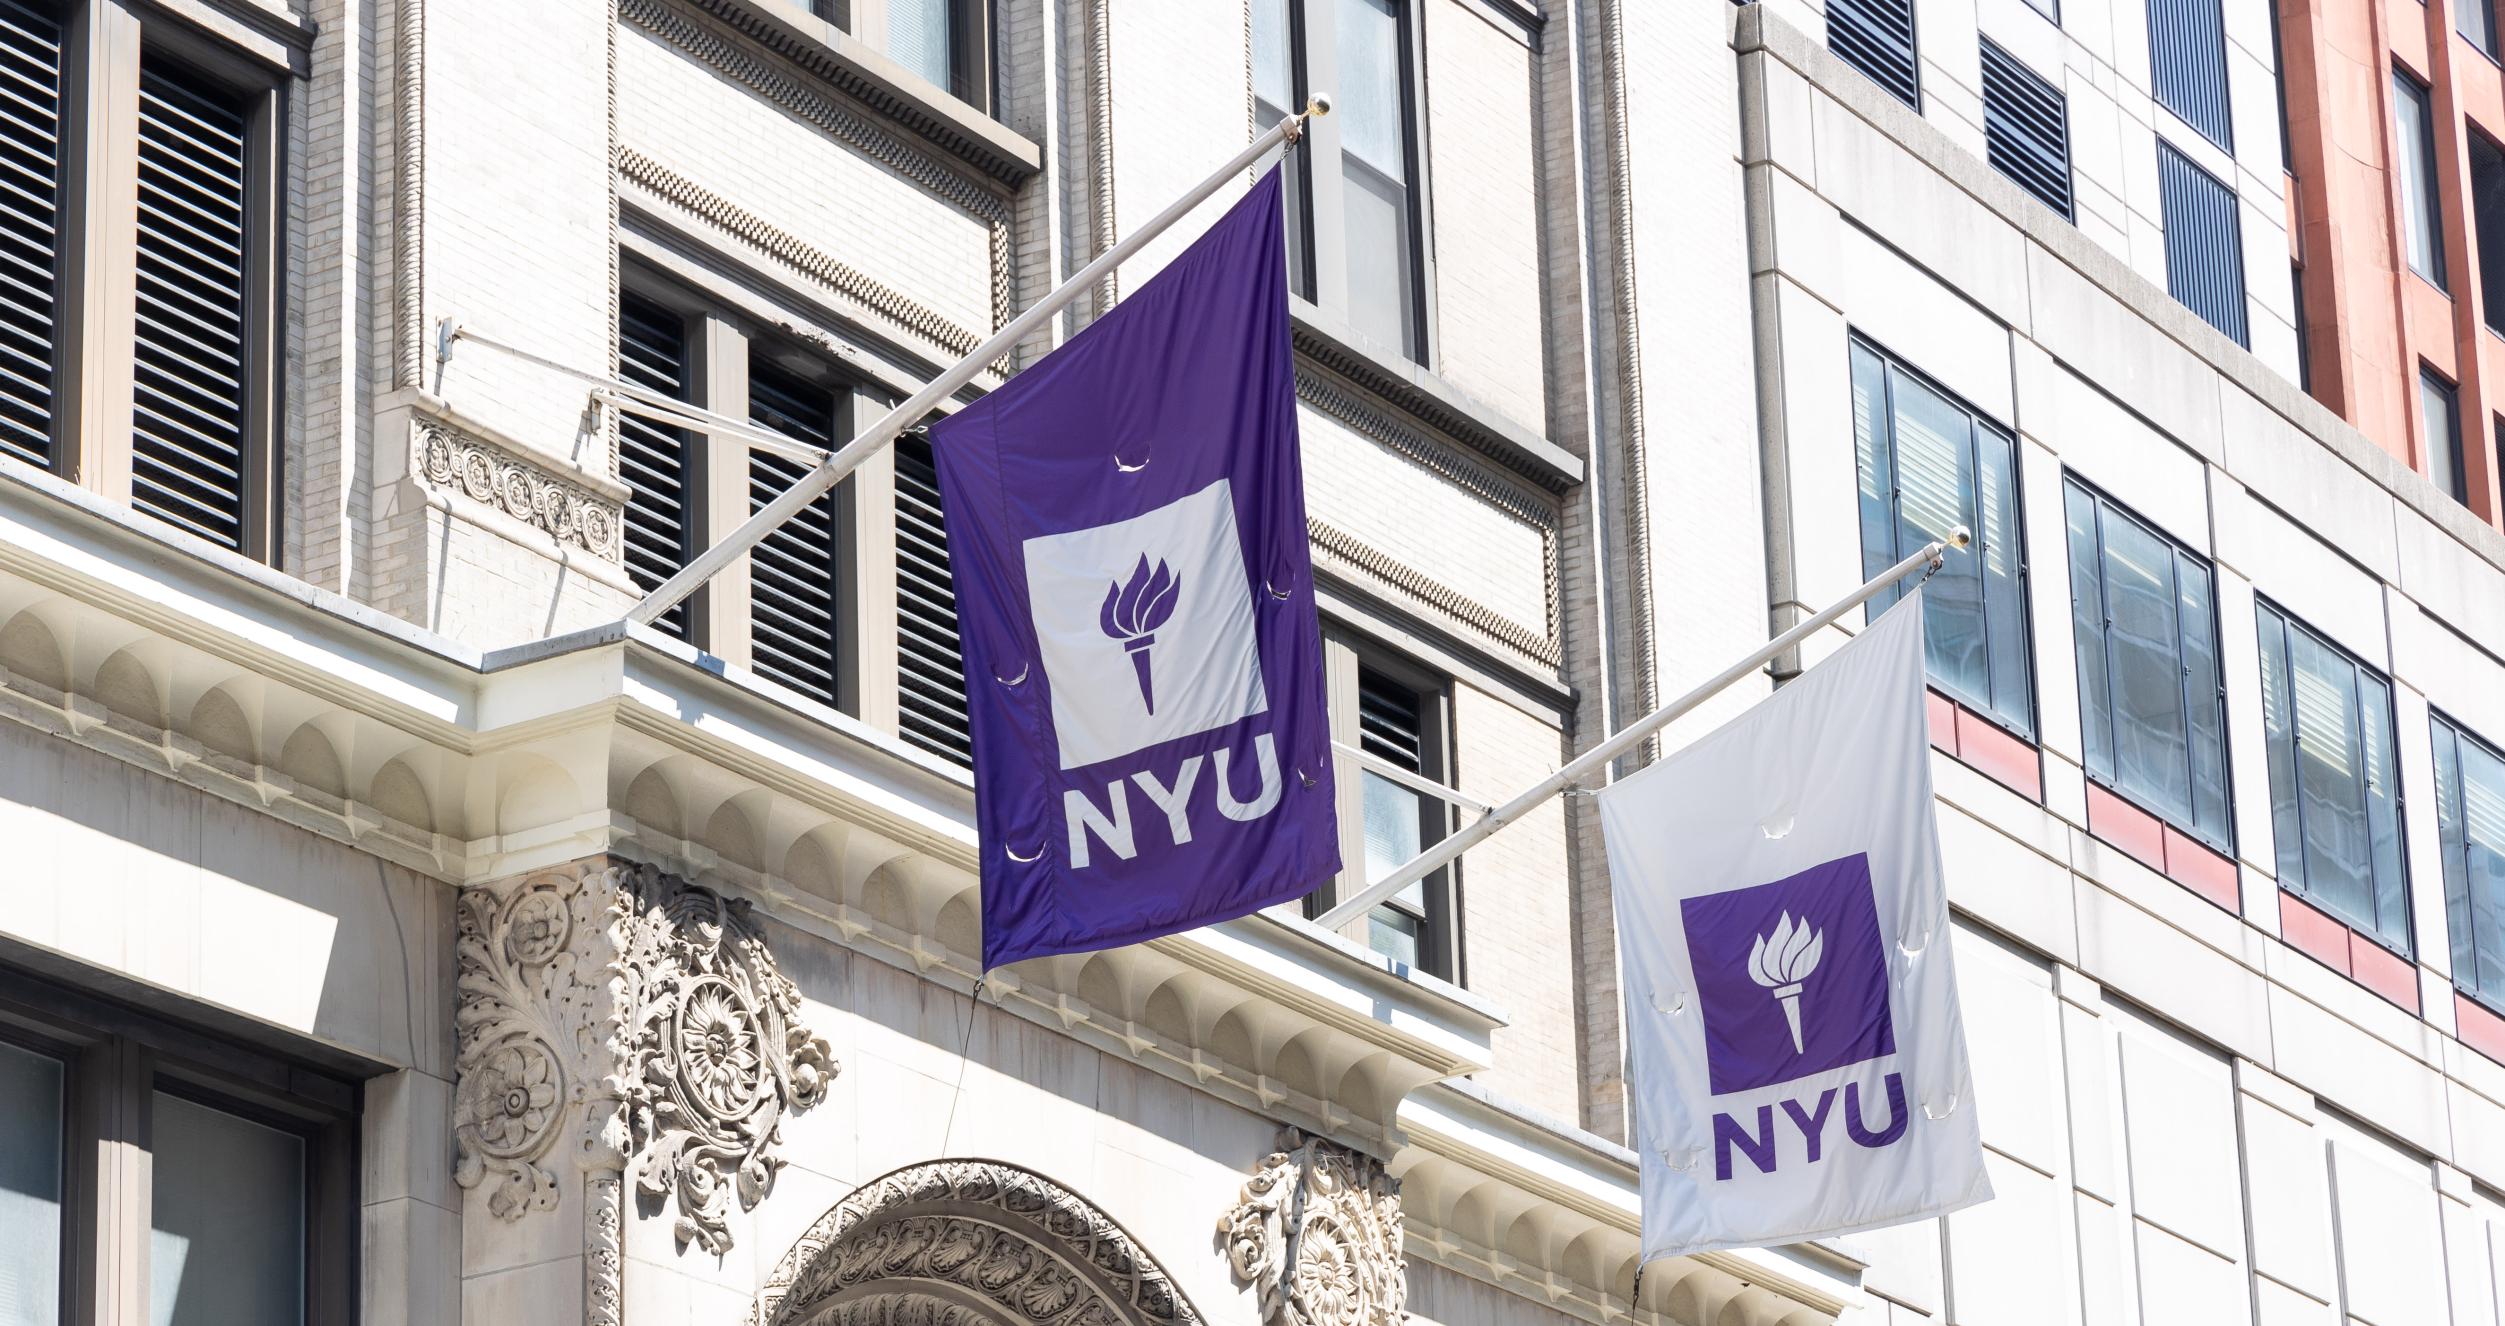 NYU Flags on building